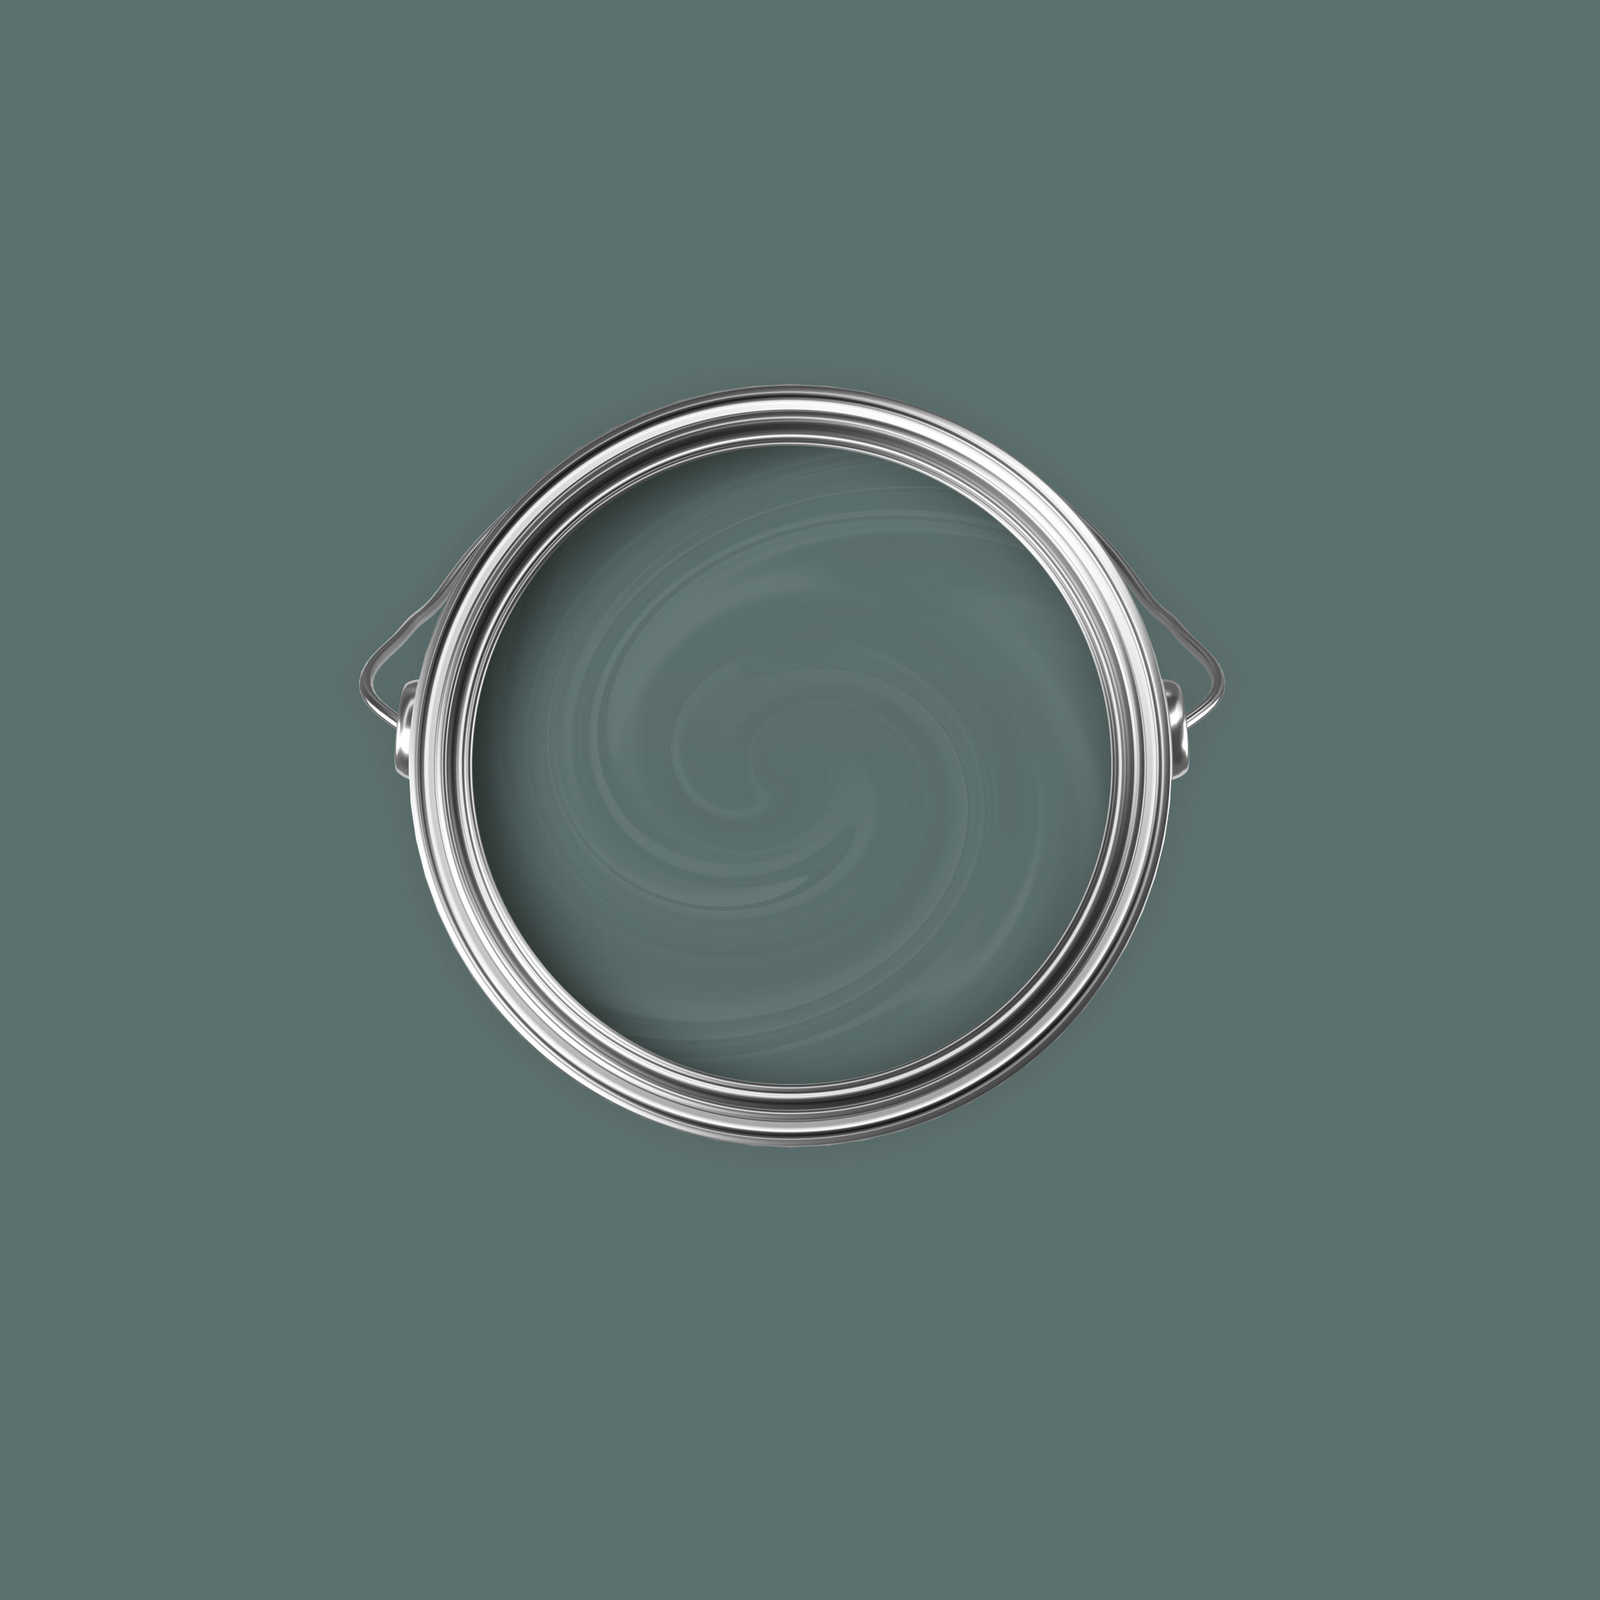             Premium Wall Paint Relaxing Grey Green »Sweet Sage« NW405 – 2.5 litre
        